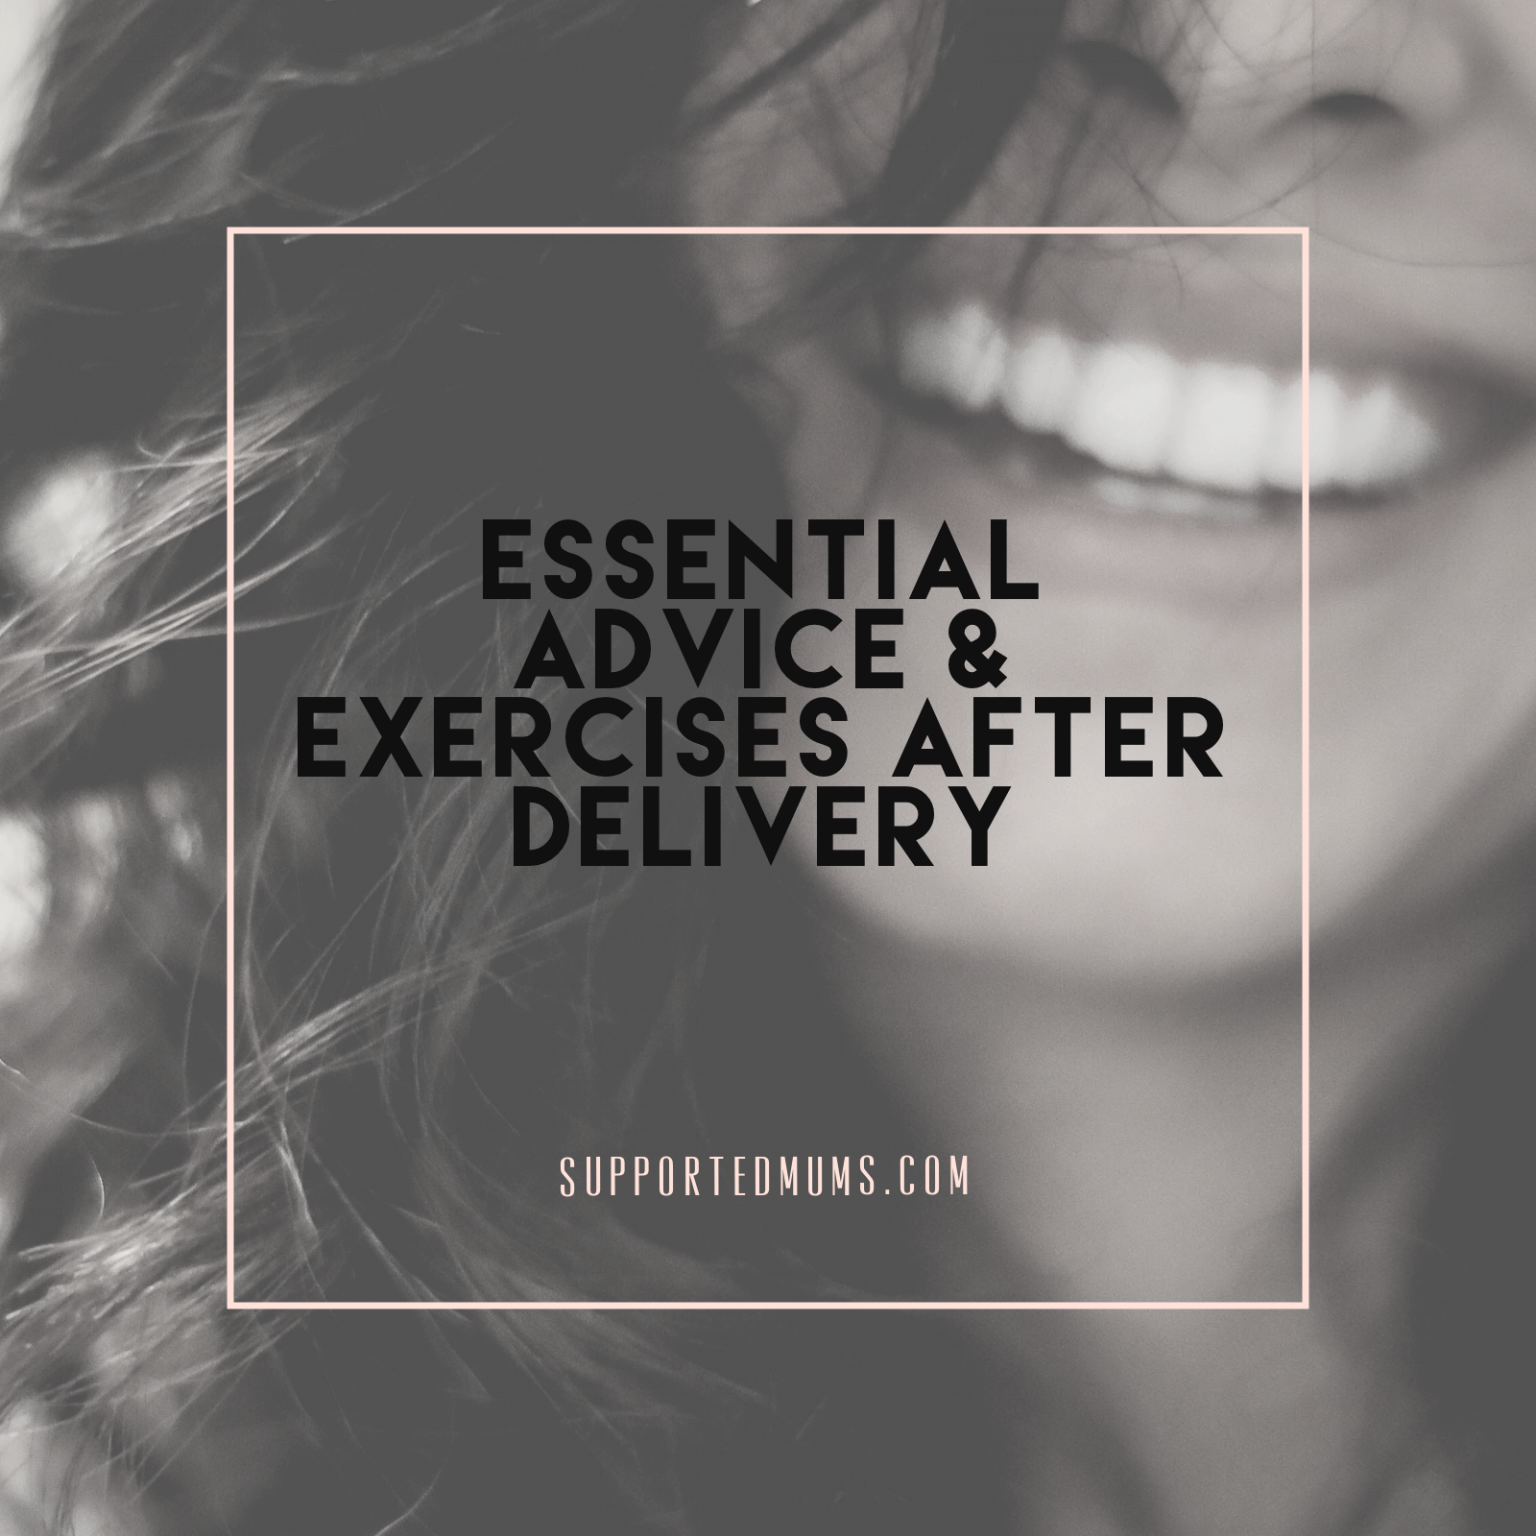 Essential Exercises & advice after delivery